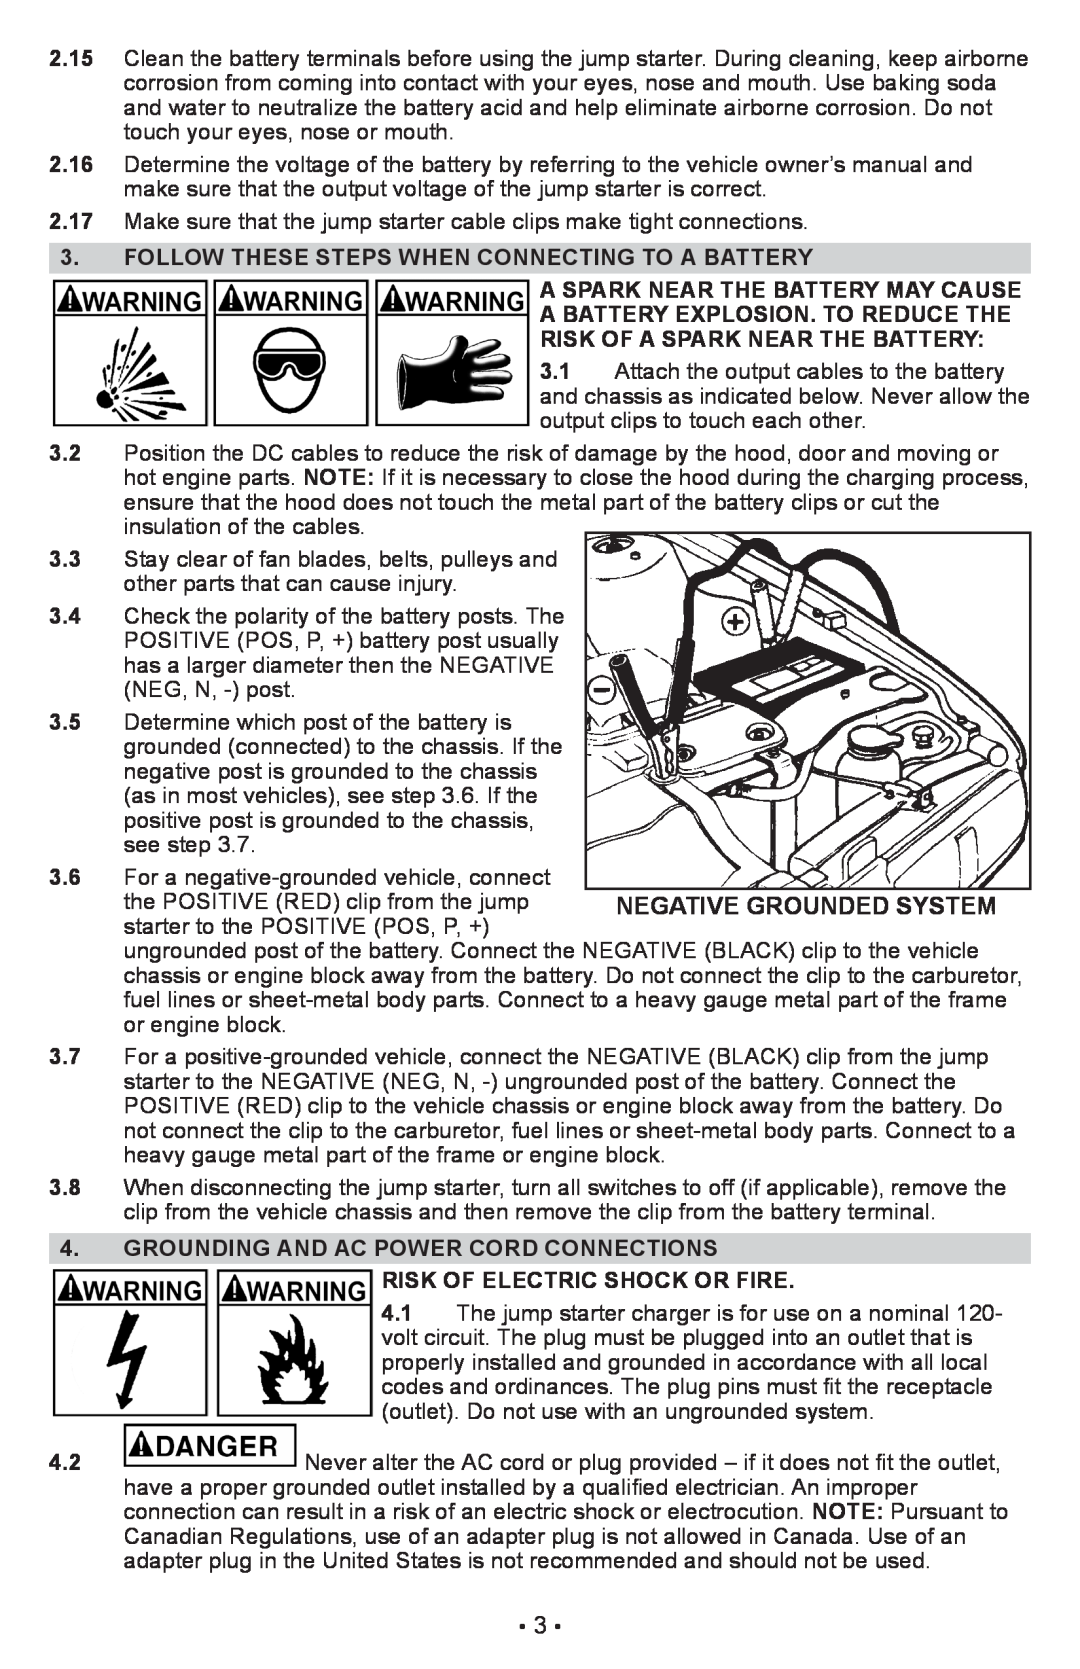 Sears 28.71988 FOLLOW THESE STEPS WHEN connecting to a BATTERY, Grounding and AC power cord connections 